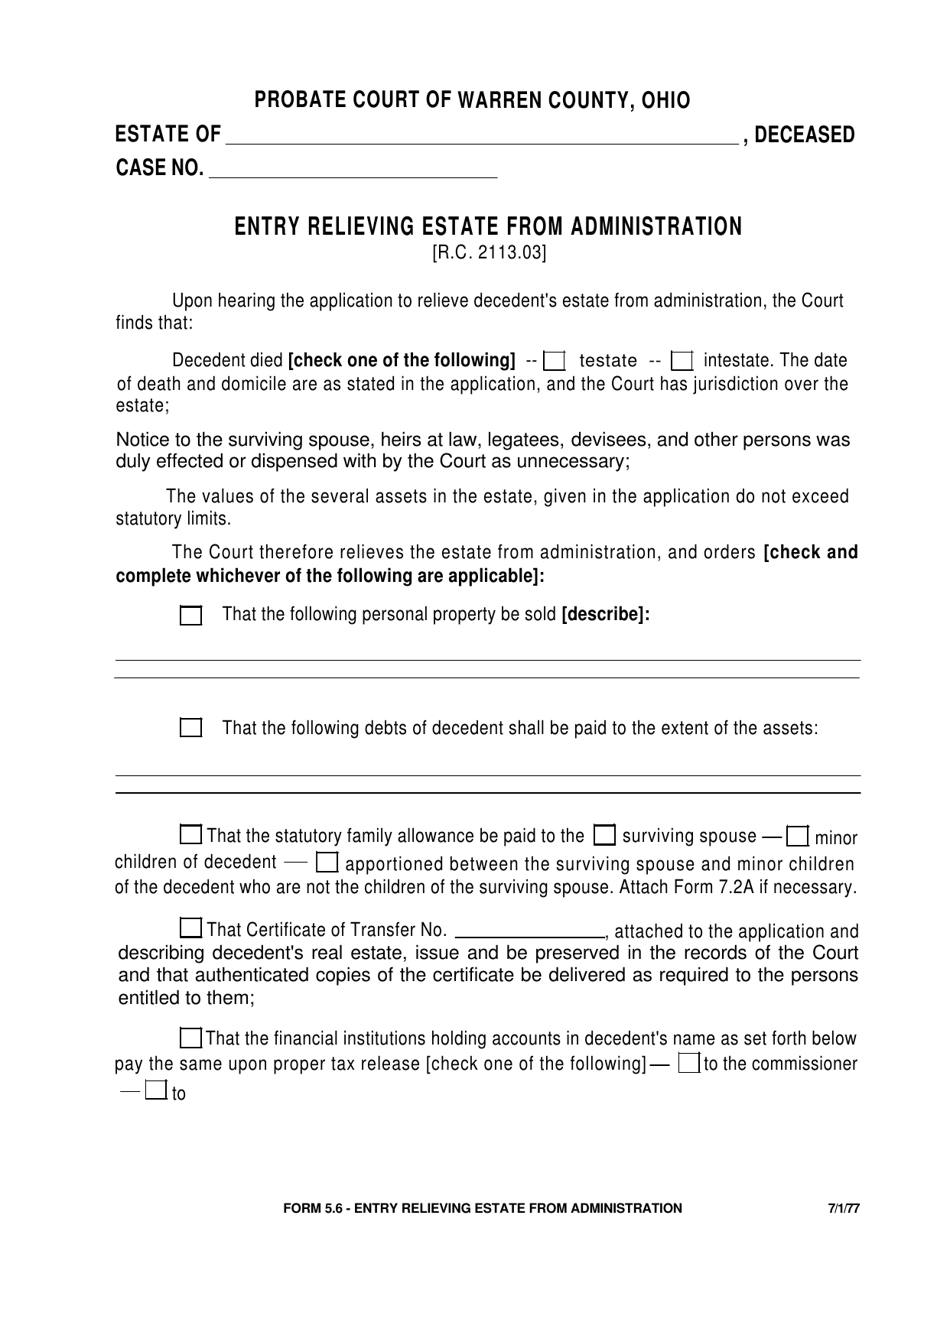 Form 5.6 Entry Relieving Estate From Administration - Warren County, Ohio, Page 1